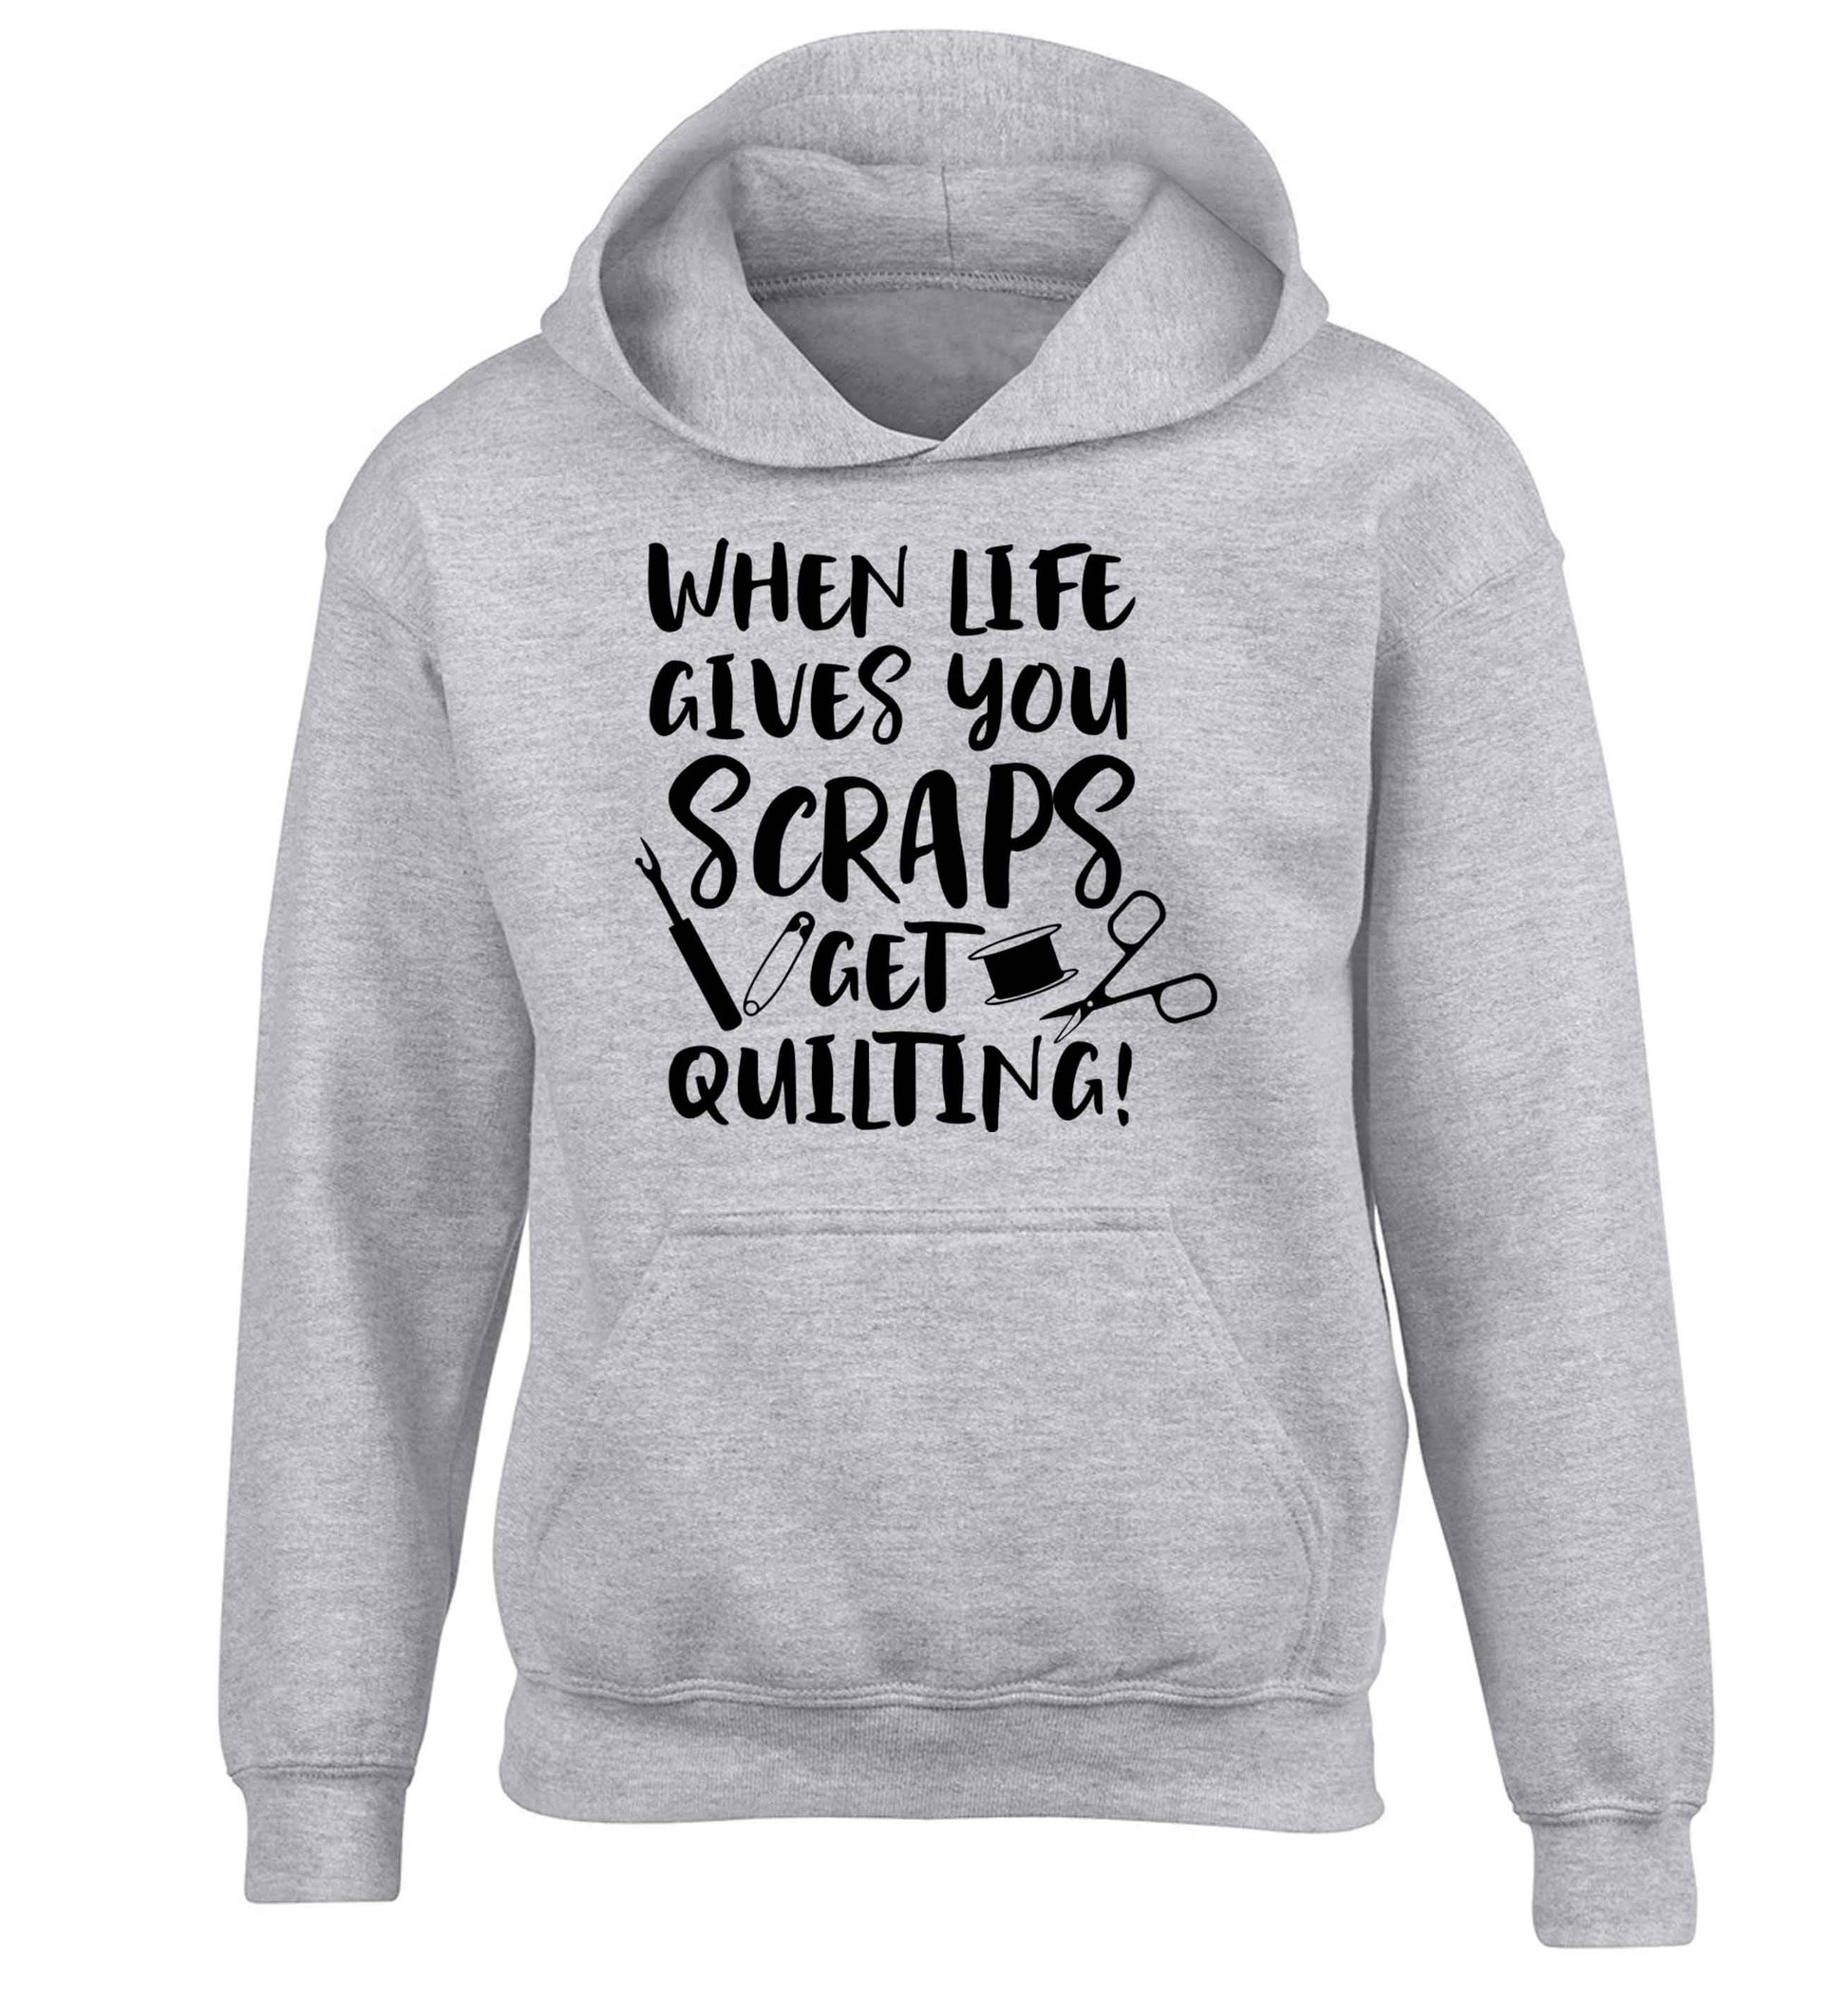 When life gives you scraps get quilting! children's grey hoodie 12-13 Years